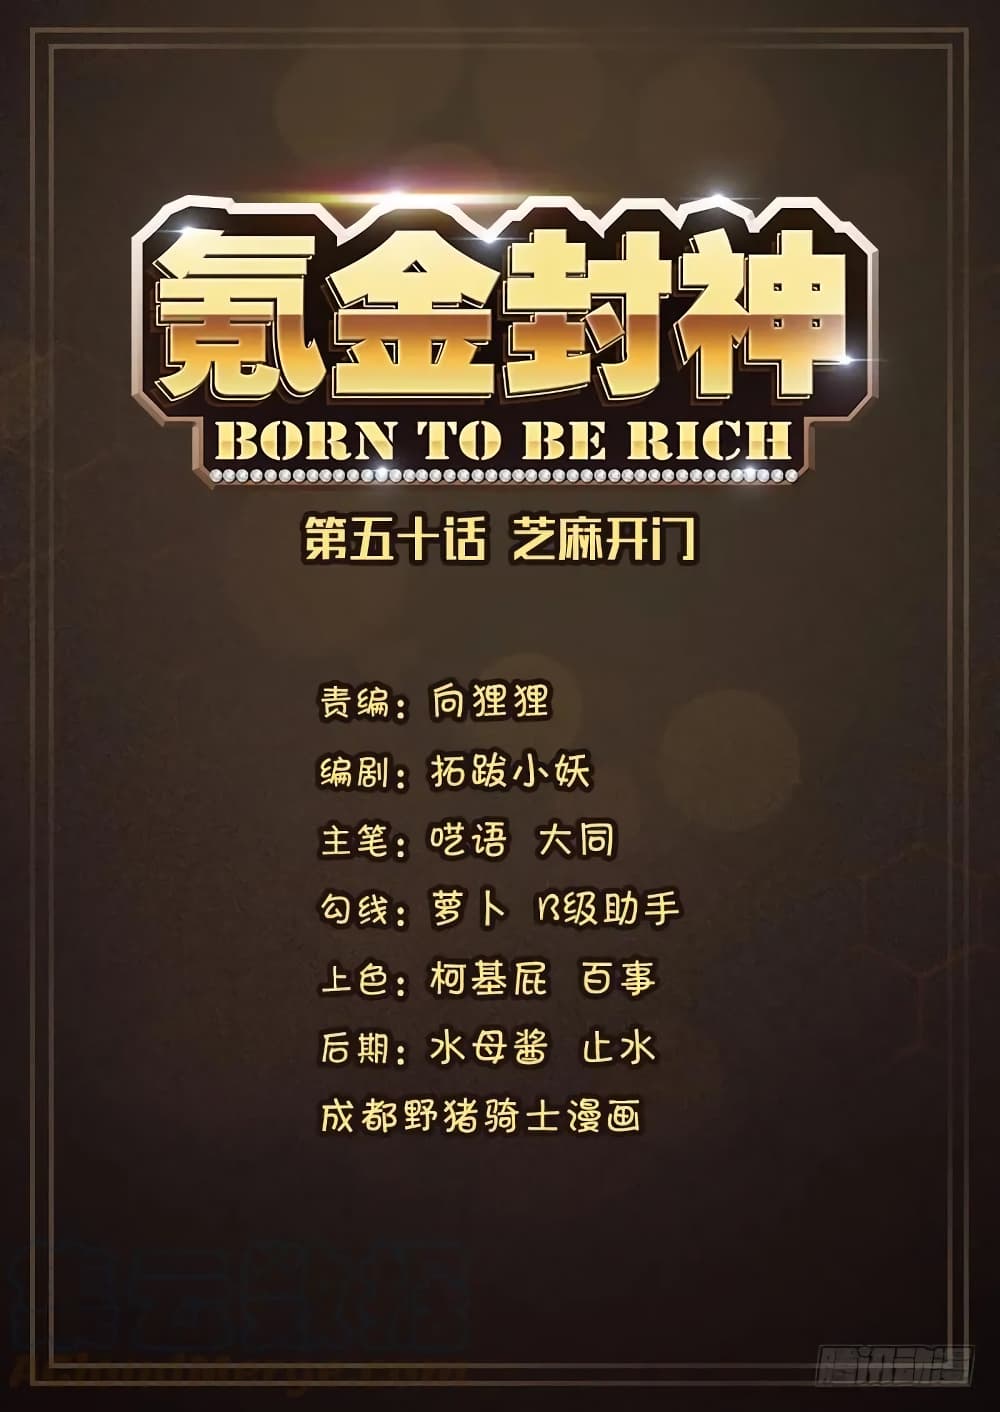 Born To Be Rich 51 (2)